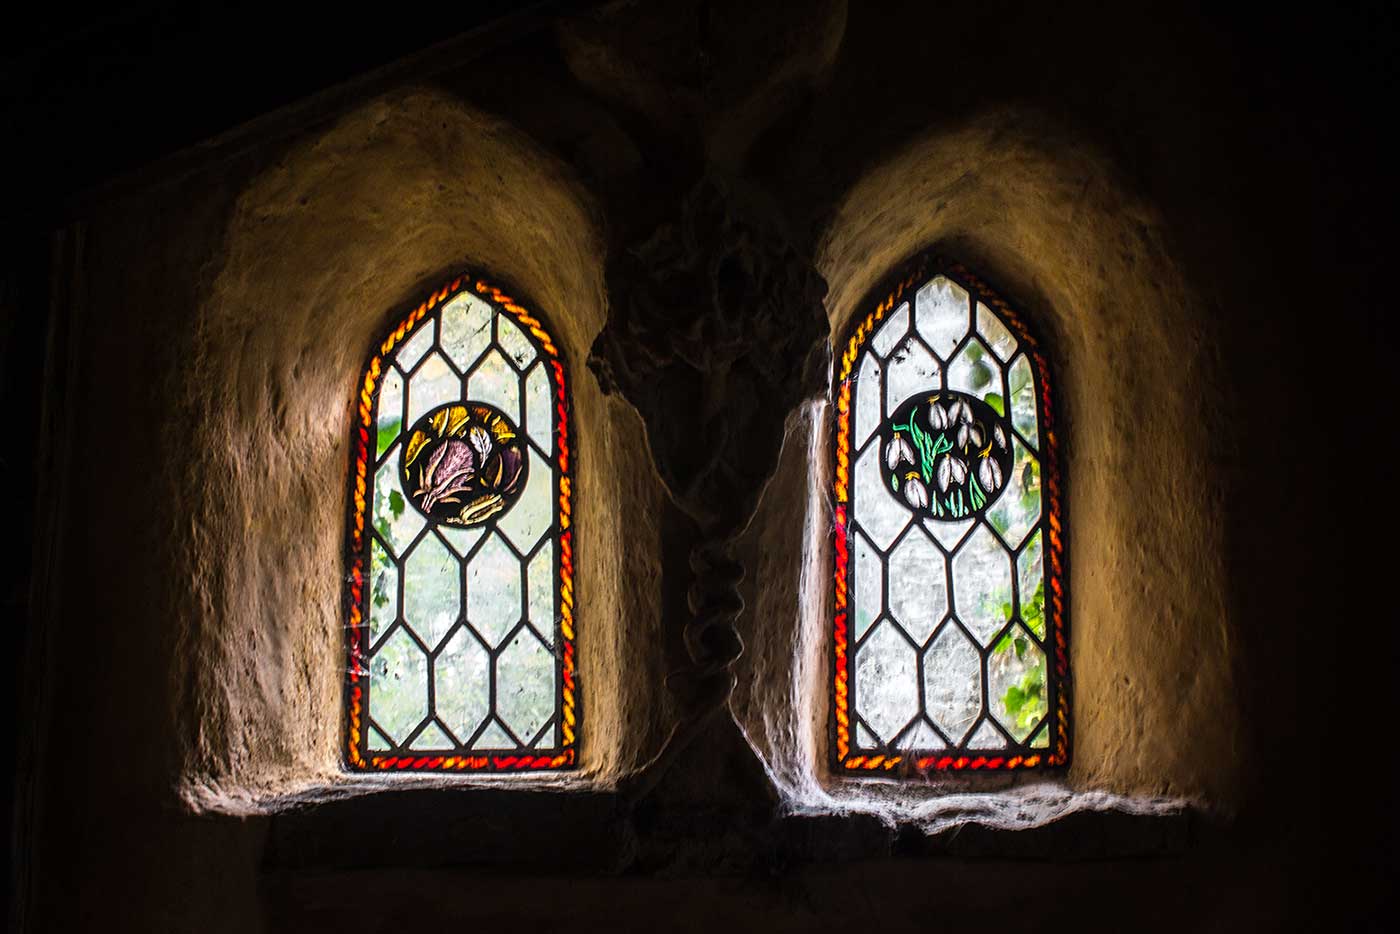 Stained glass windows inside the main building. Colin's Barn, Wiltshire, UK.